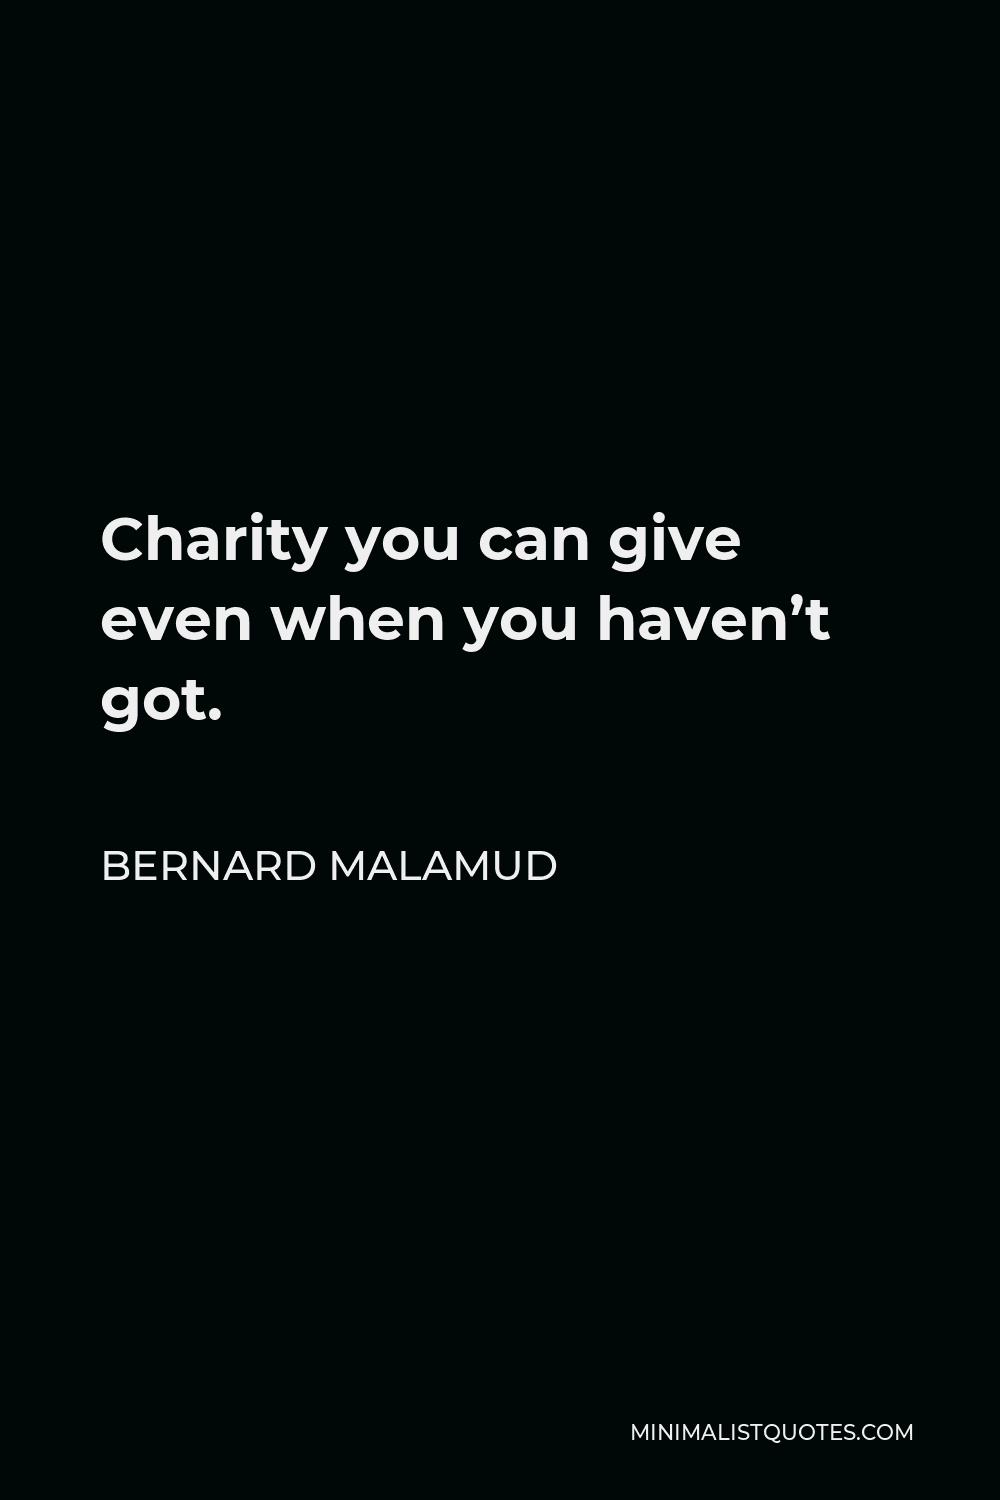 Bernard Malamud Quote - Charity you can give even when you haven’t got.